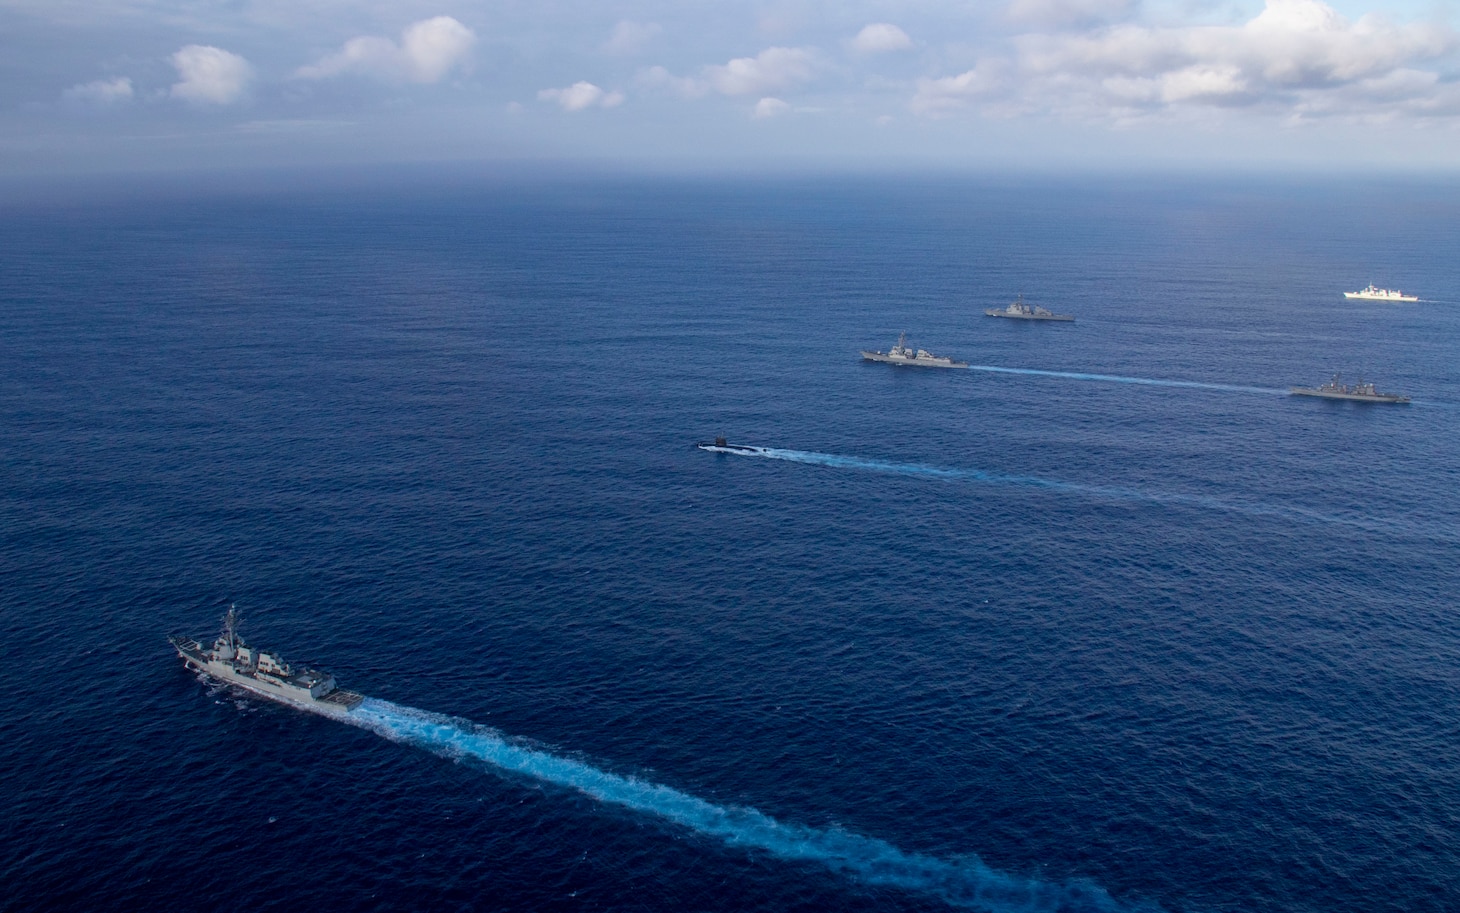 231110-N-TD381-1339 PHILIPPINE SEA (Nov. 10, 2023) Ships from the Japan Maritime Self-Defense Force, Royal Australian Navy, Royal Canadian Navy and United States Navy sail in formation during Annual Exercise (ANNUALEX) 2023. ANNUALEX is a multilateral exercise conducted by naval elements of the Royal Australian, Royal Canadian, Japan Maritime Self-Defense Force, and U.S. navies to demonstrate naval interoperability and a joint commitment to a free and open Indo-Pacific. Vinson, flagship of Carrier Strike Group ONE, is deployed to the U.S. 7th Fleet area of operations in support of a free and open Indo-Pacific. (U.S. Navy photo by Mass Communication Specialist 3rd Class Isaiah Goessl)